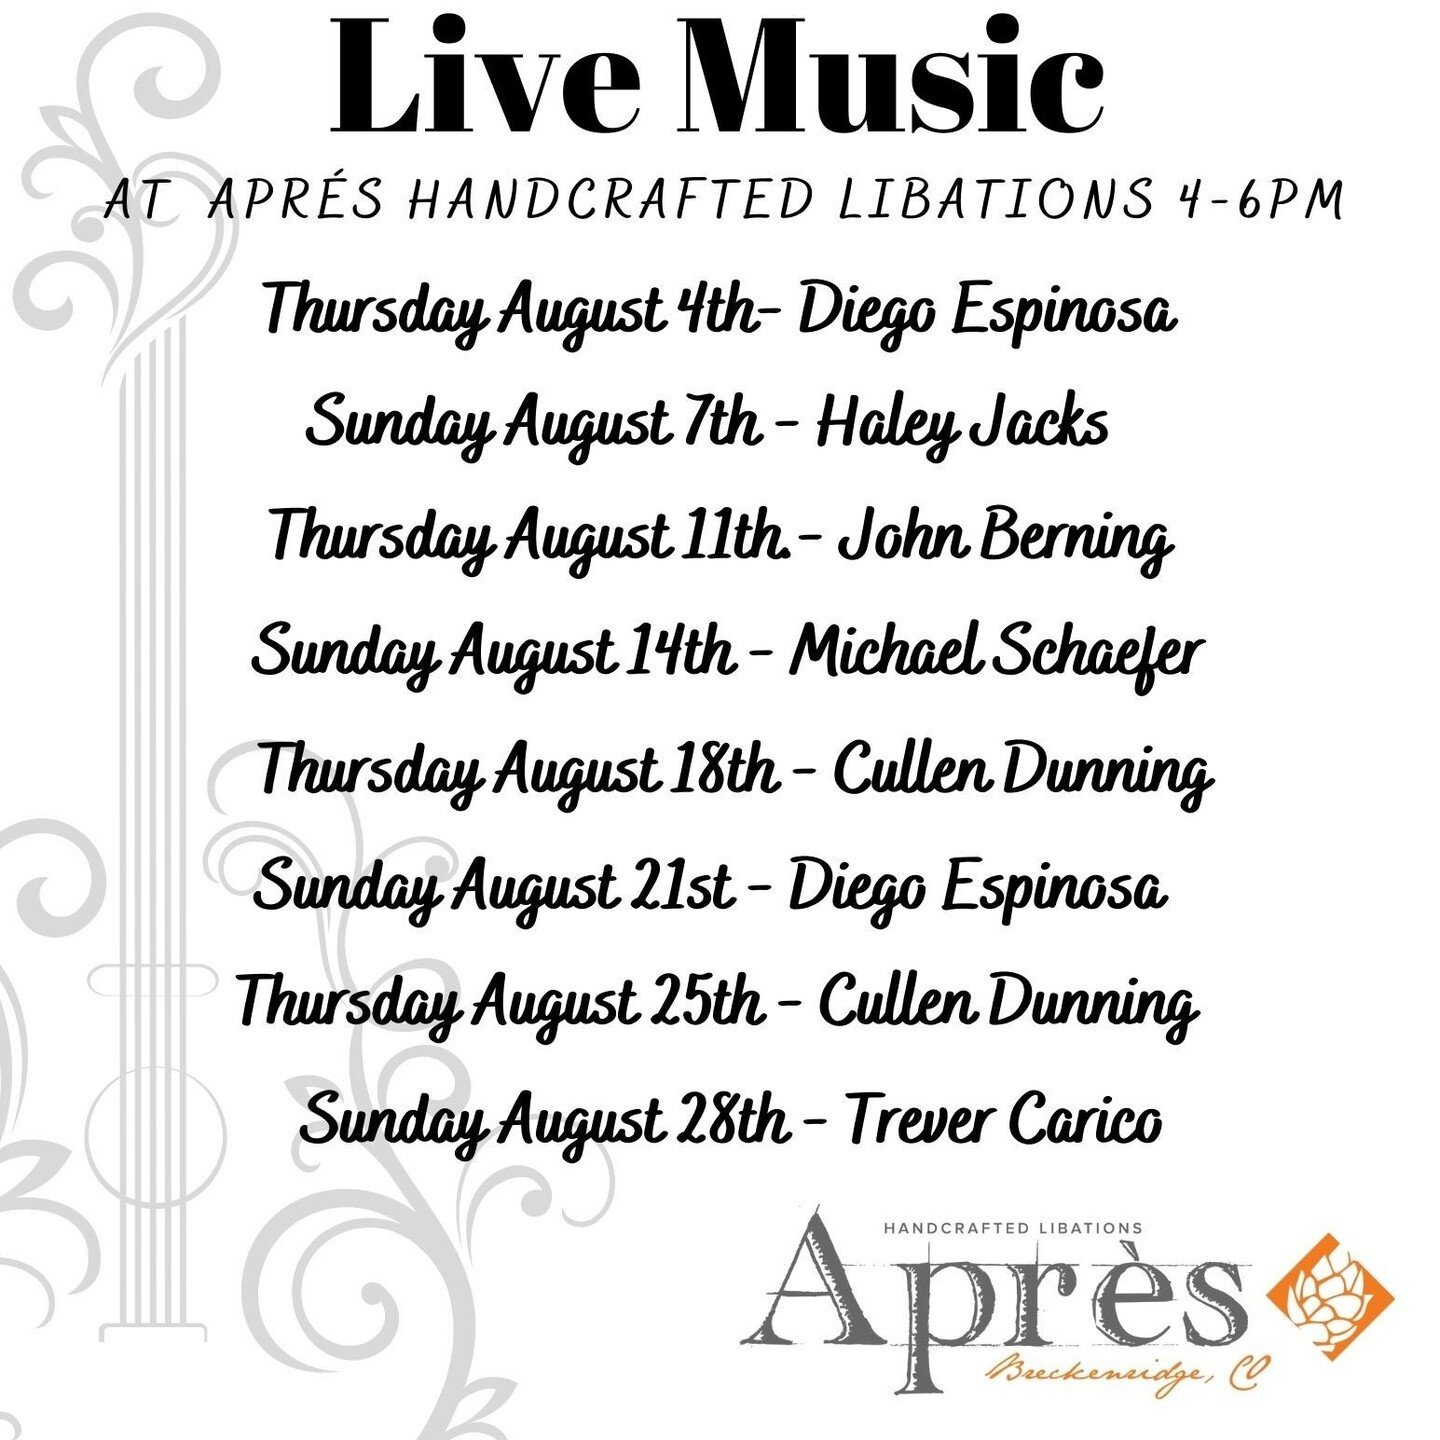 Presenting Apr&eacute;s Handcrafted Libations Music Schedule for August! Join us on Thursday's and Sunday's from 4-6pm. Check out our talented local musicians and enjoy a craft cocktail, craft beer or our extensive local craft spirit selection! 

#lo